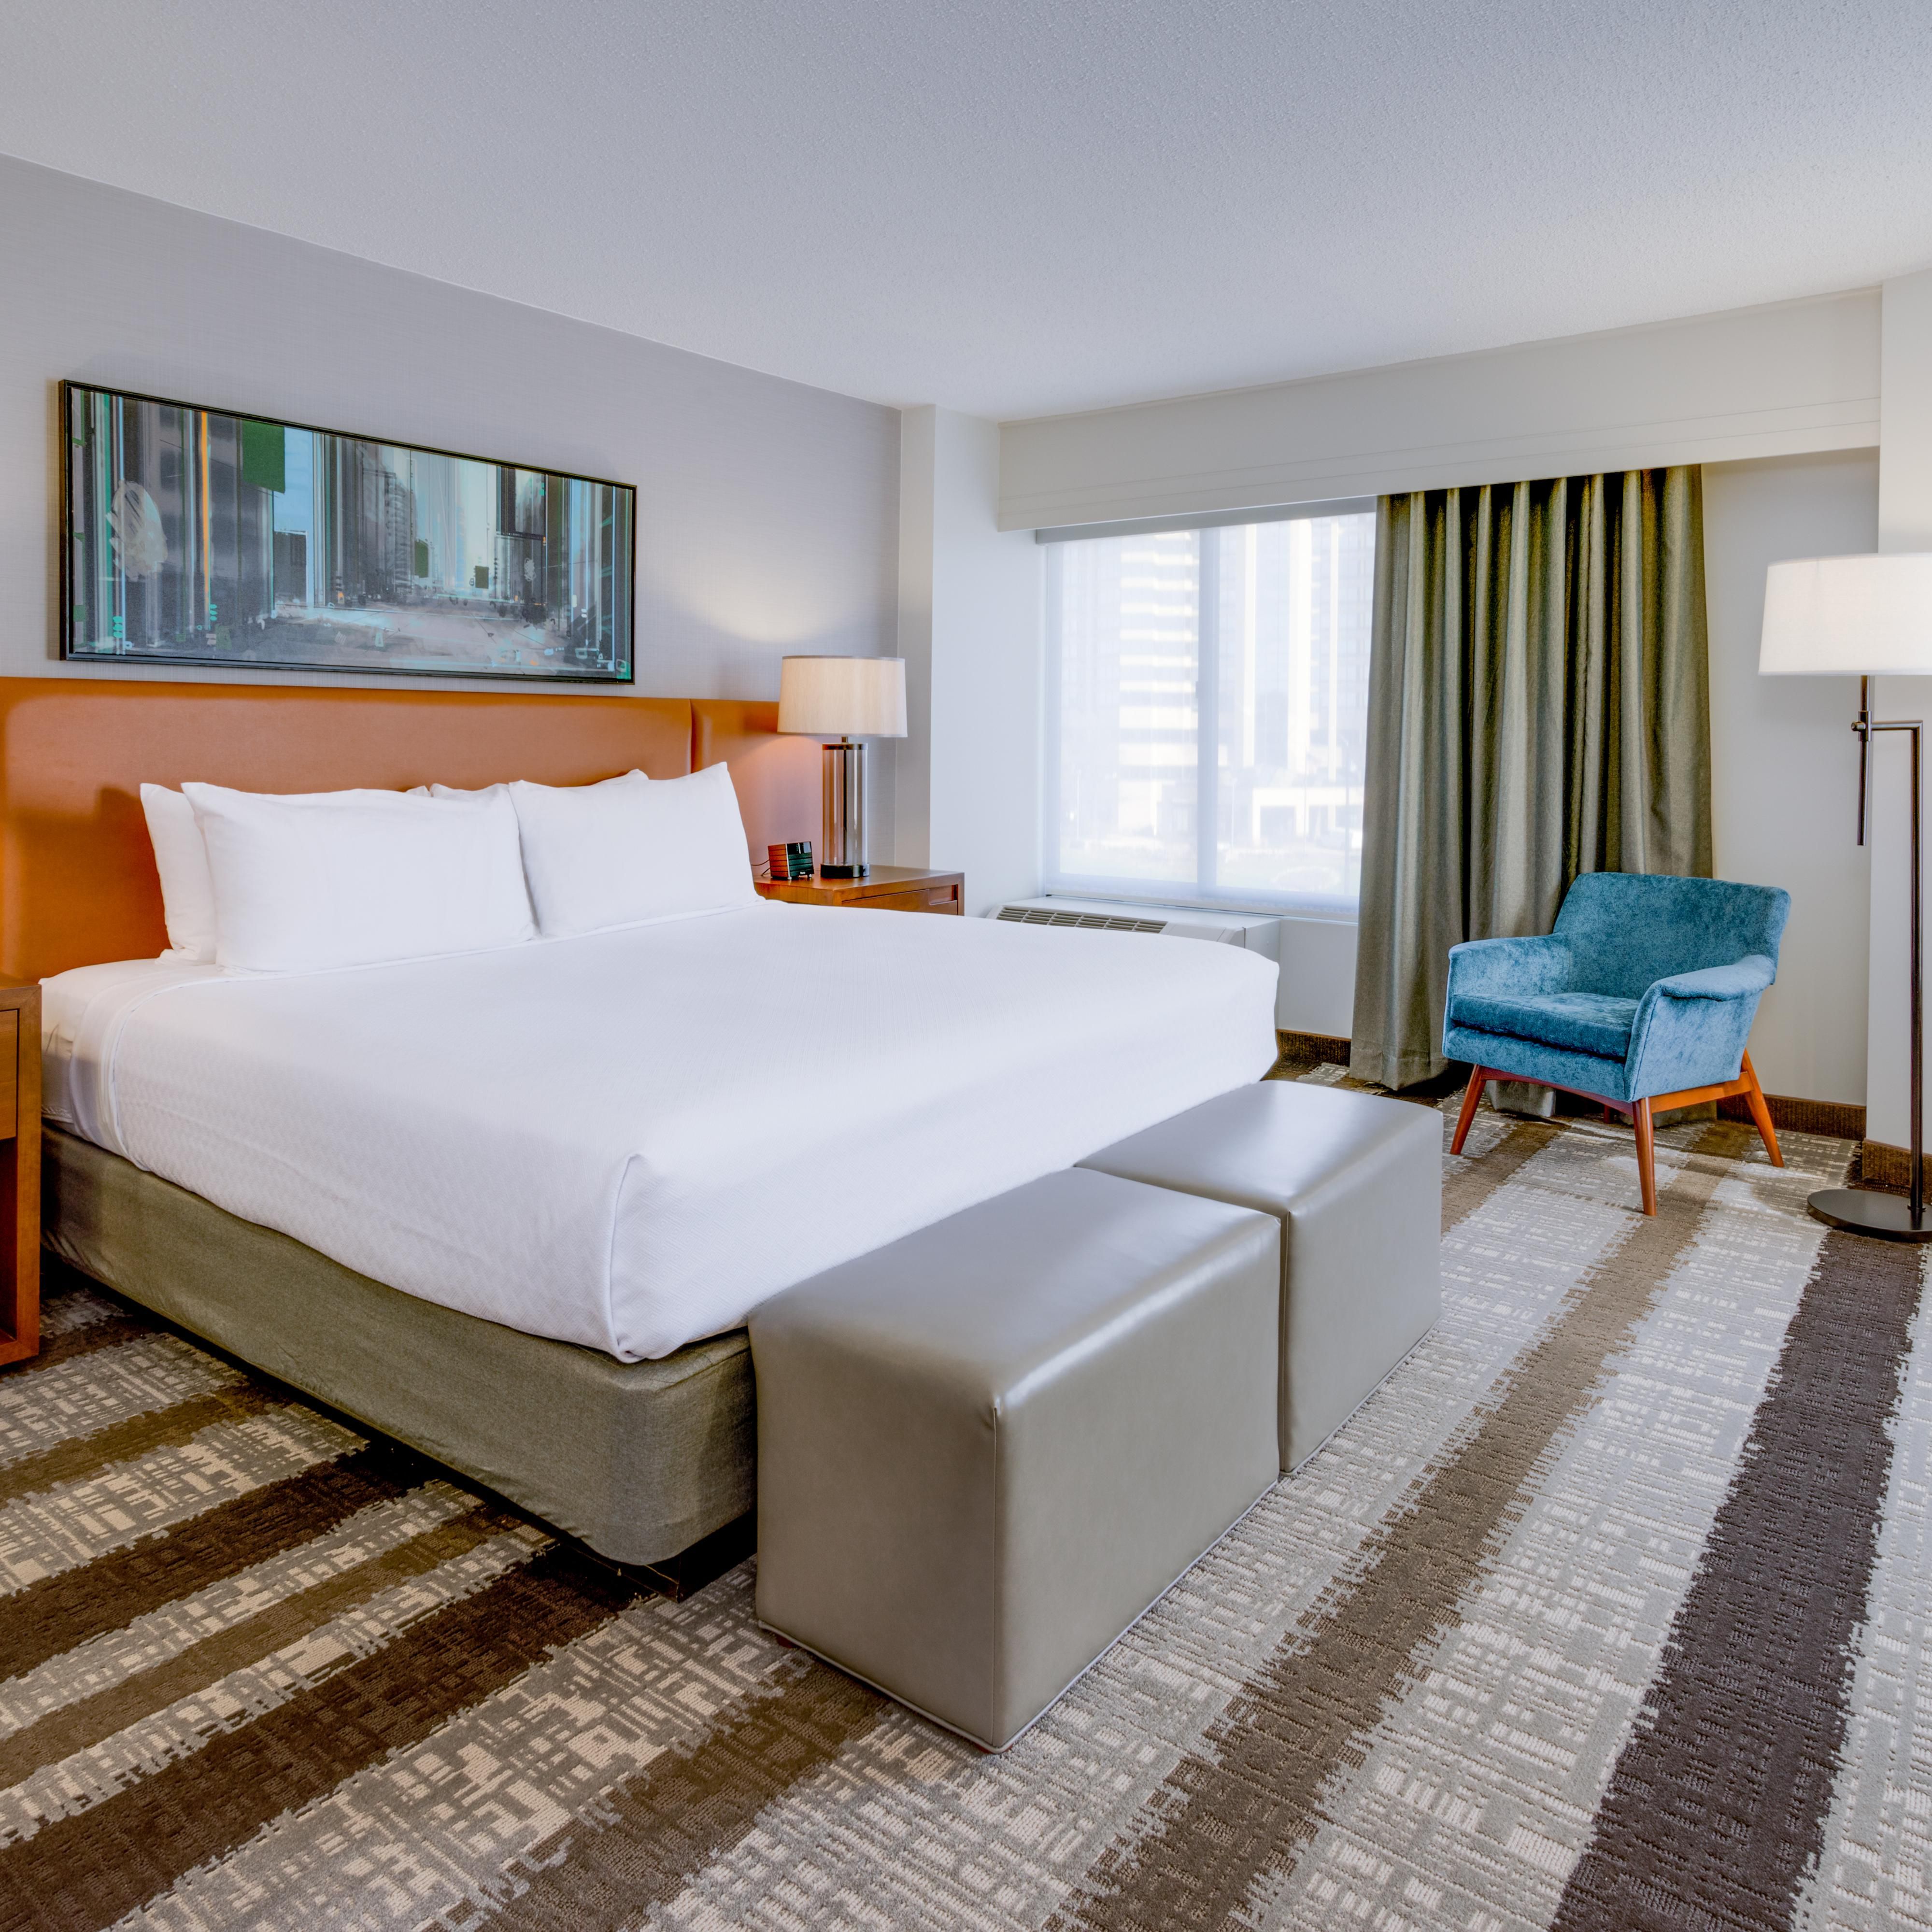 Our King Feature Rooms provide more space and special features